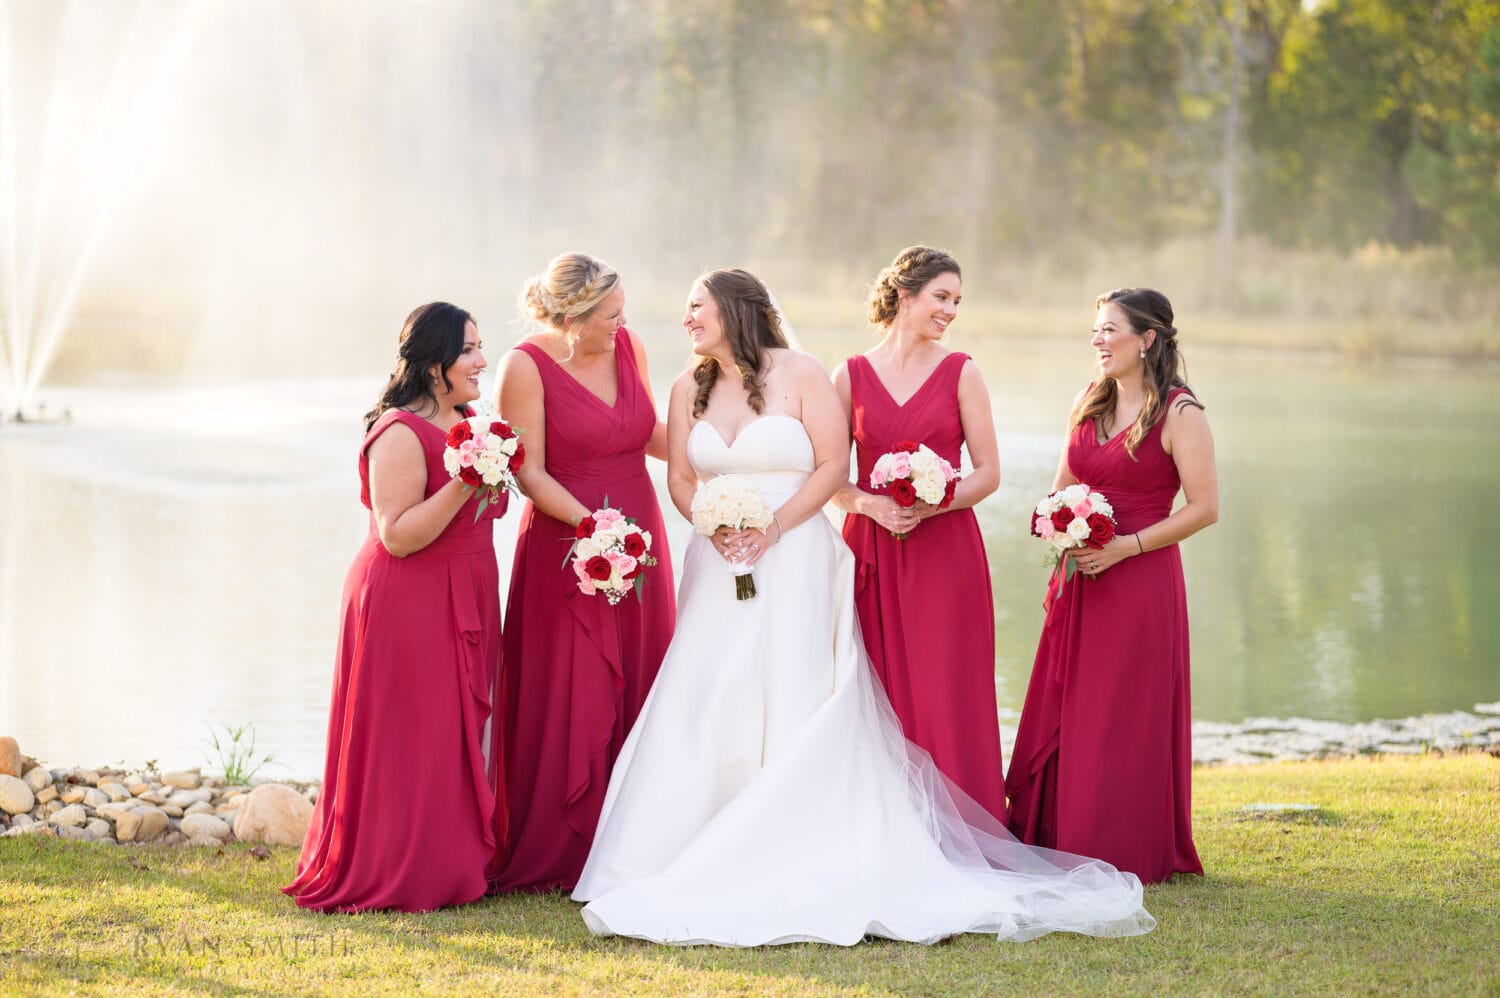 Bridesmaids laughing by the fountain - The Venue at White Oaks Farm